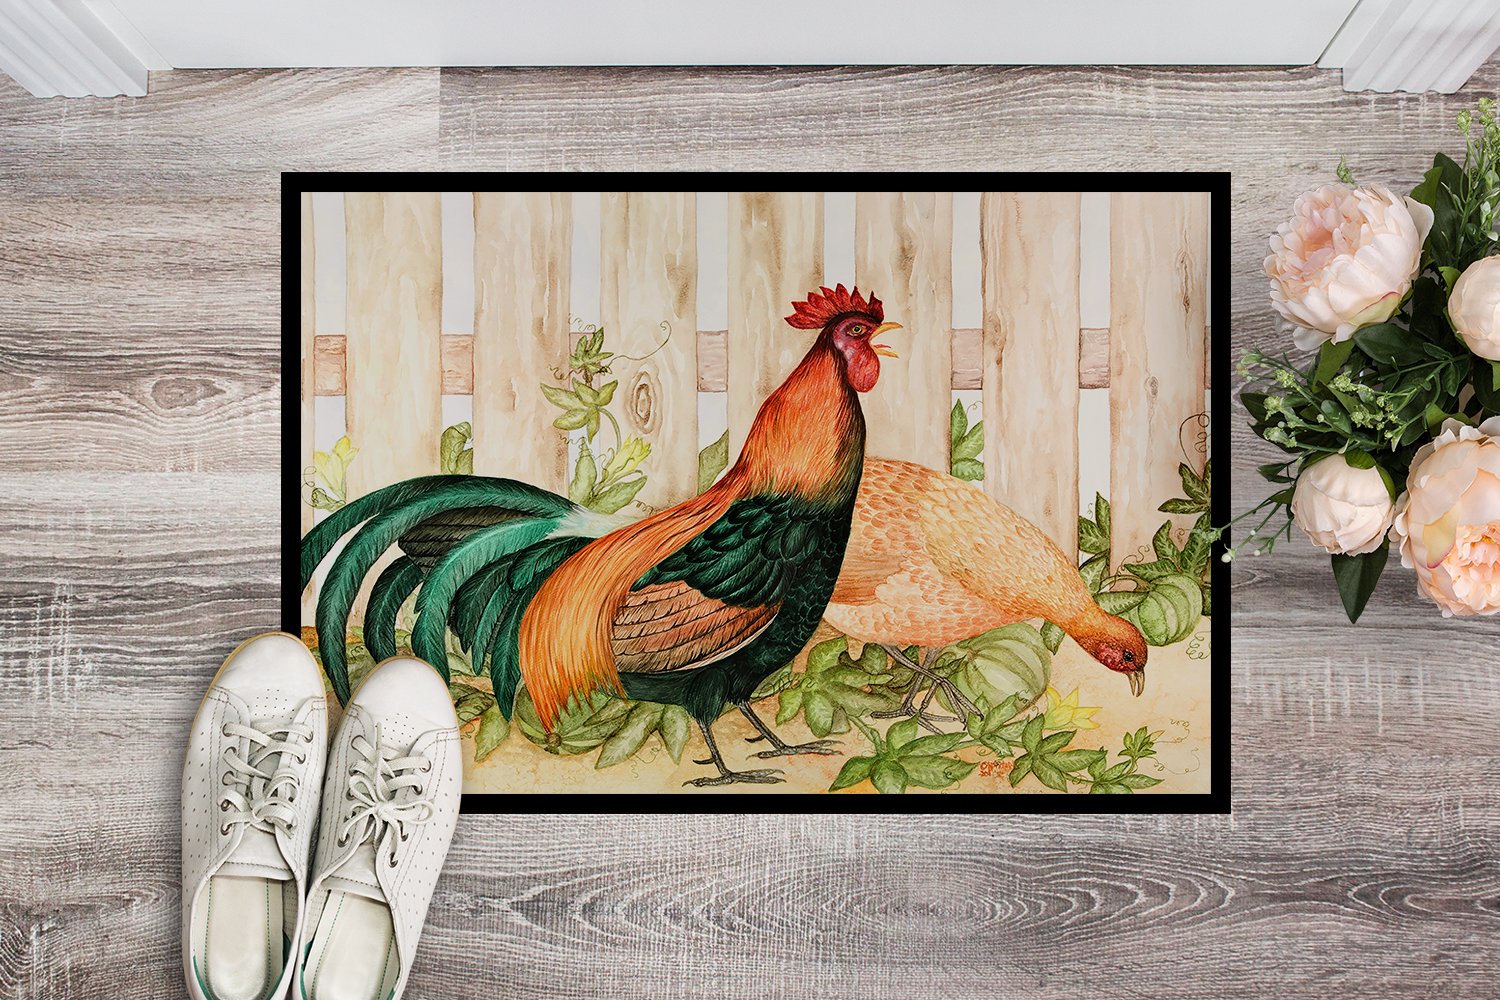 Buy this Chicken and Rooster by Ferris Hotard Indoor or Outdoor Mat 24x36